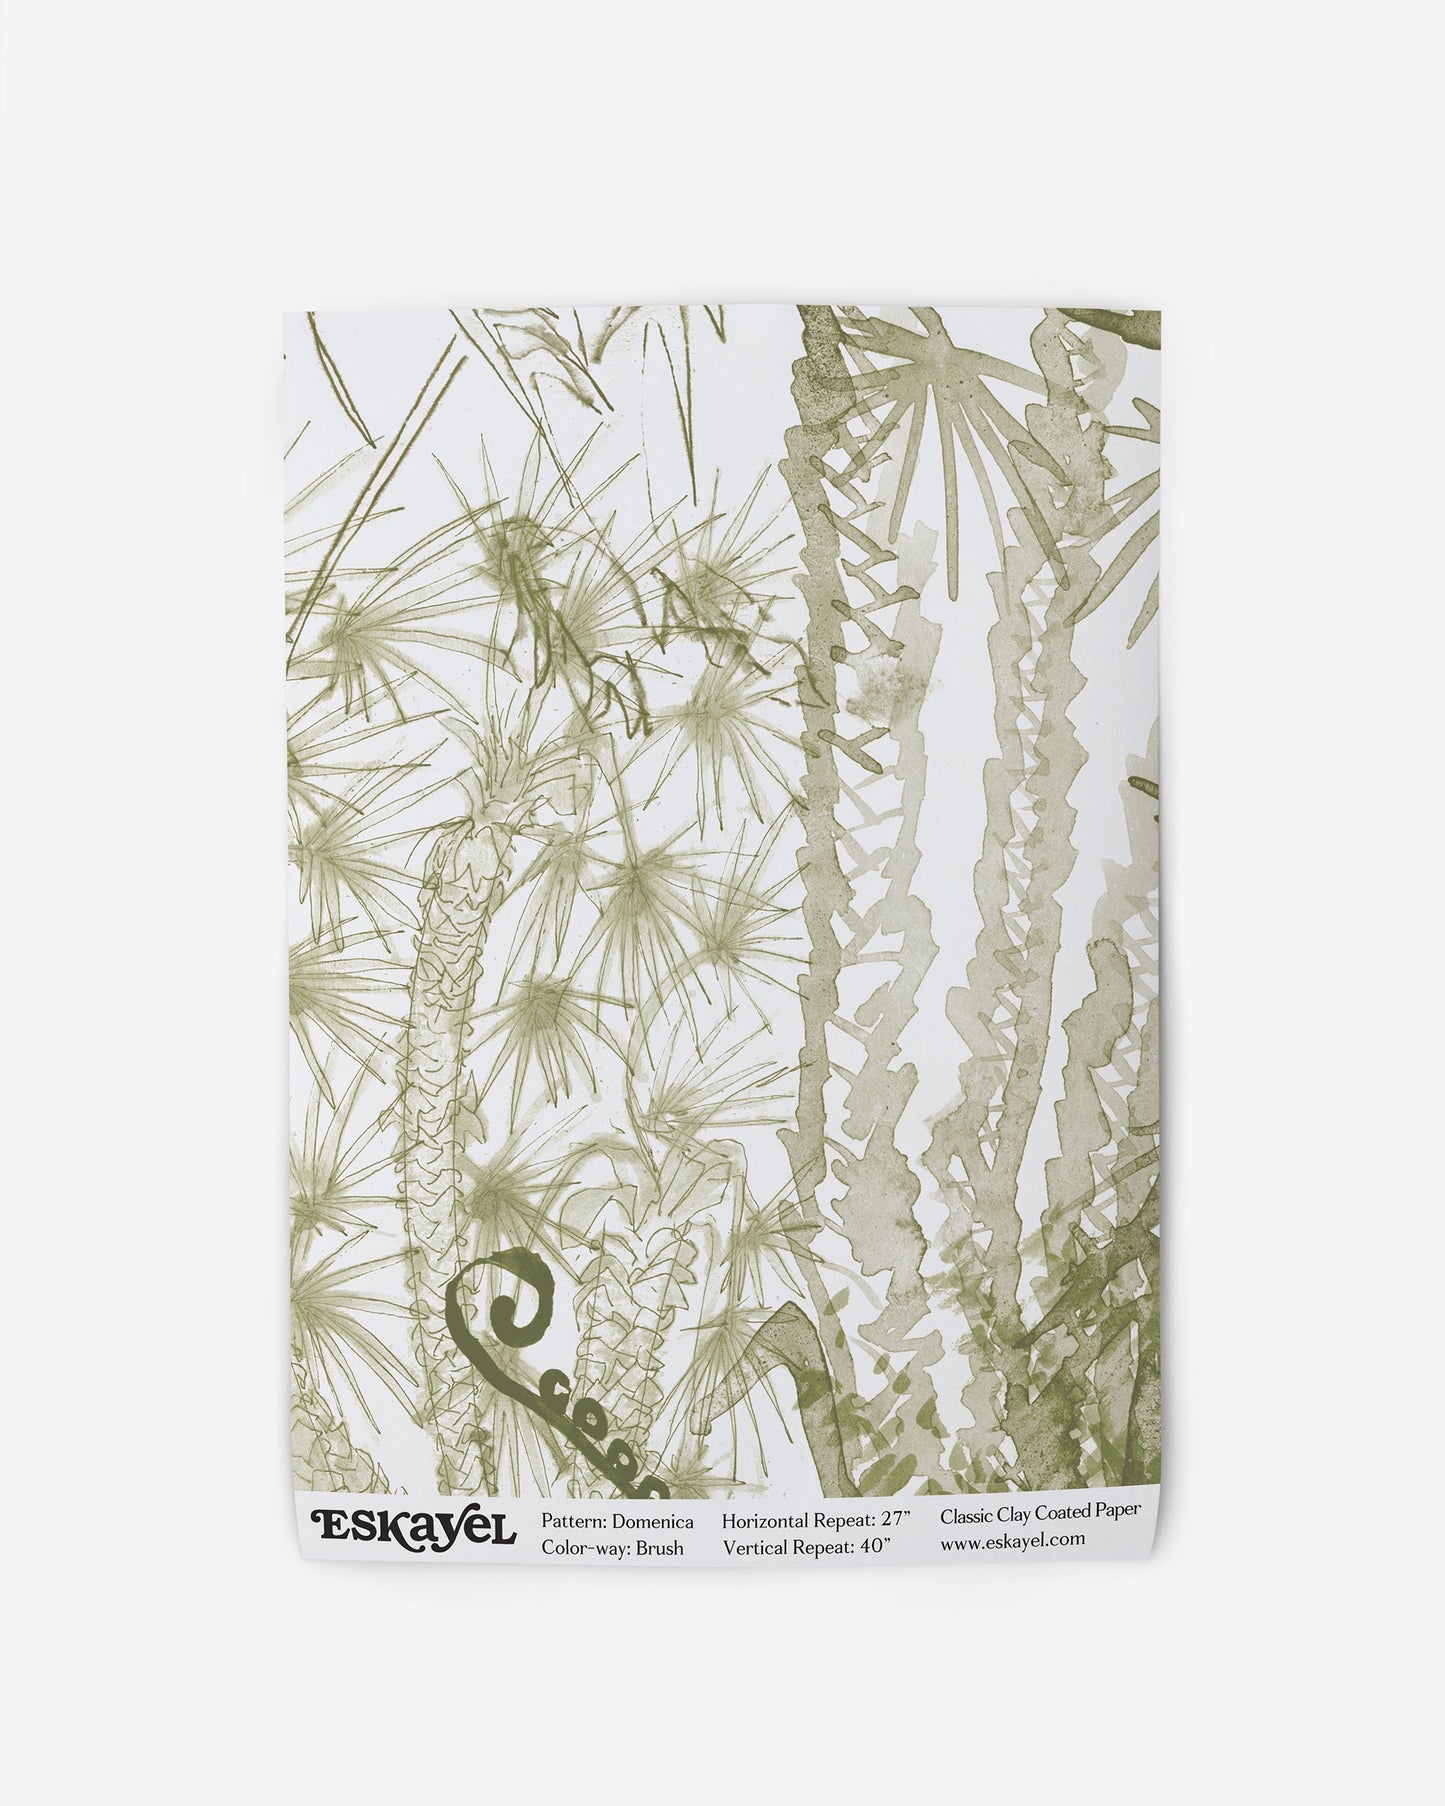 a Domenica Wallpaper Sample Brush with an image of a plant on it